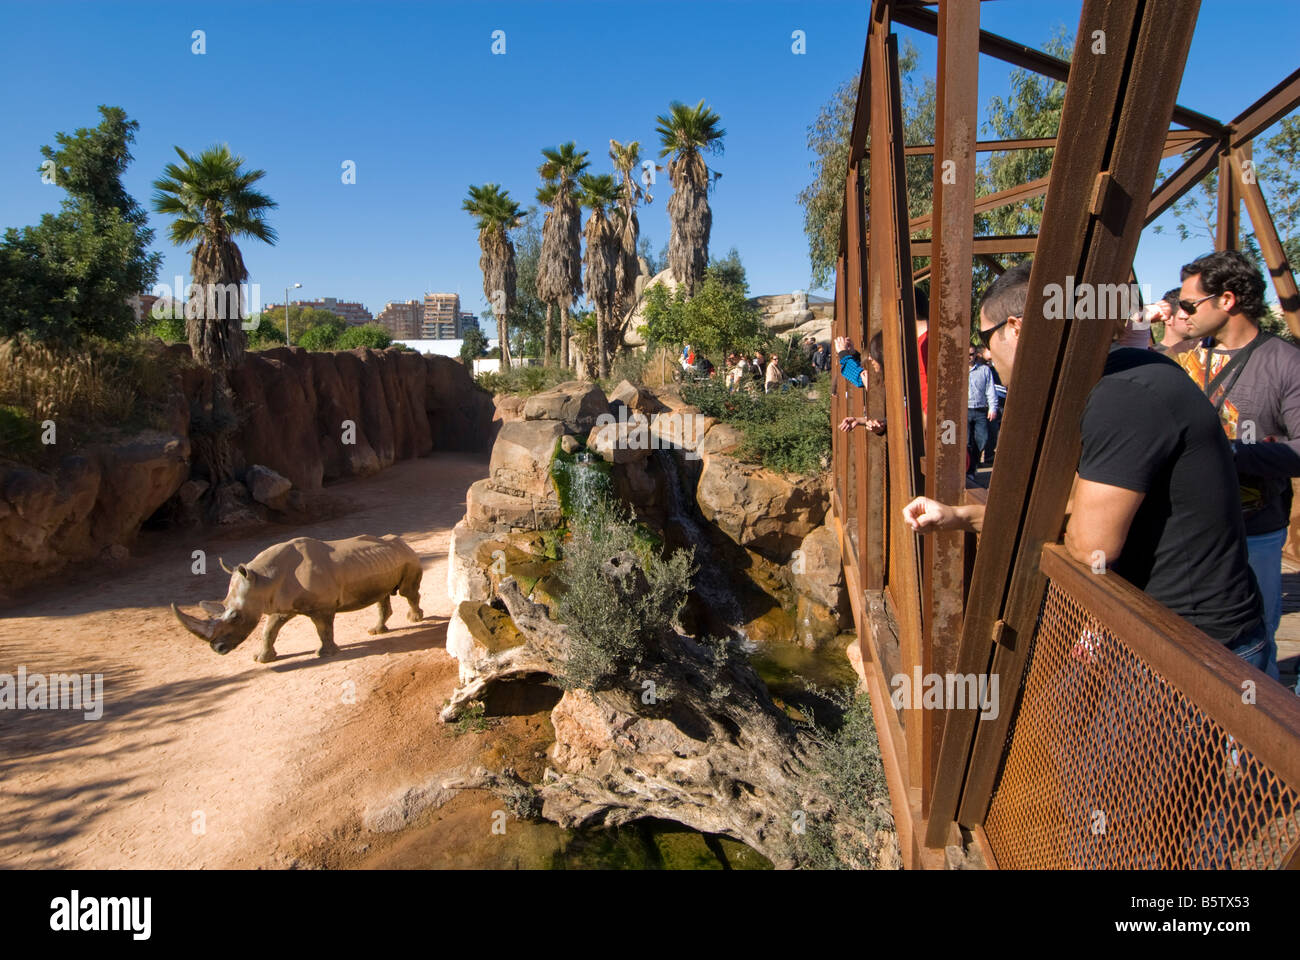 People looking at rhinoceros in enclosure from iron bridge platform in the Biopark zoo which opened in 2008 Valencia Spain Stock Photo